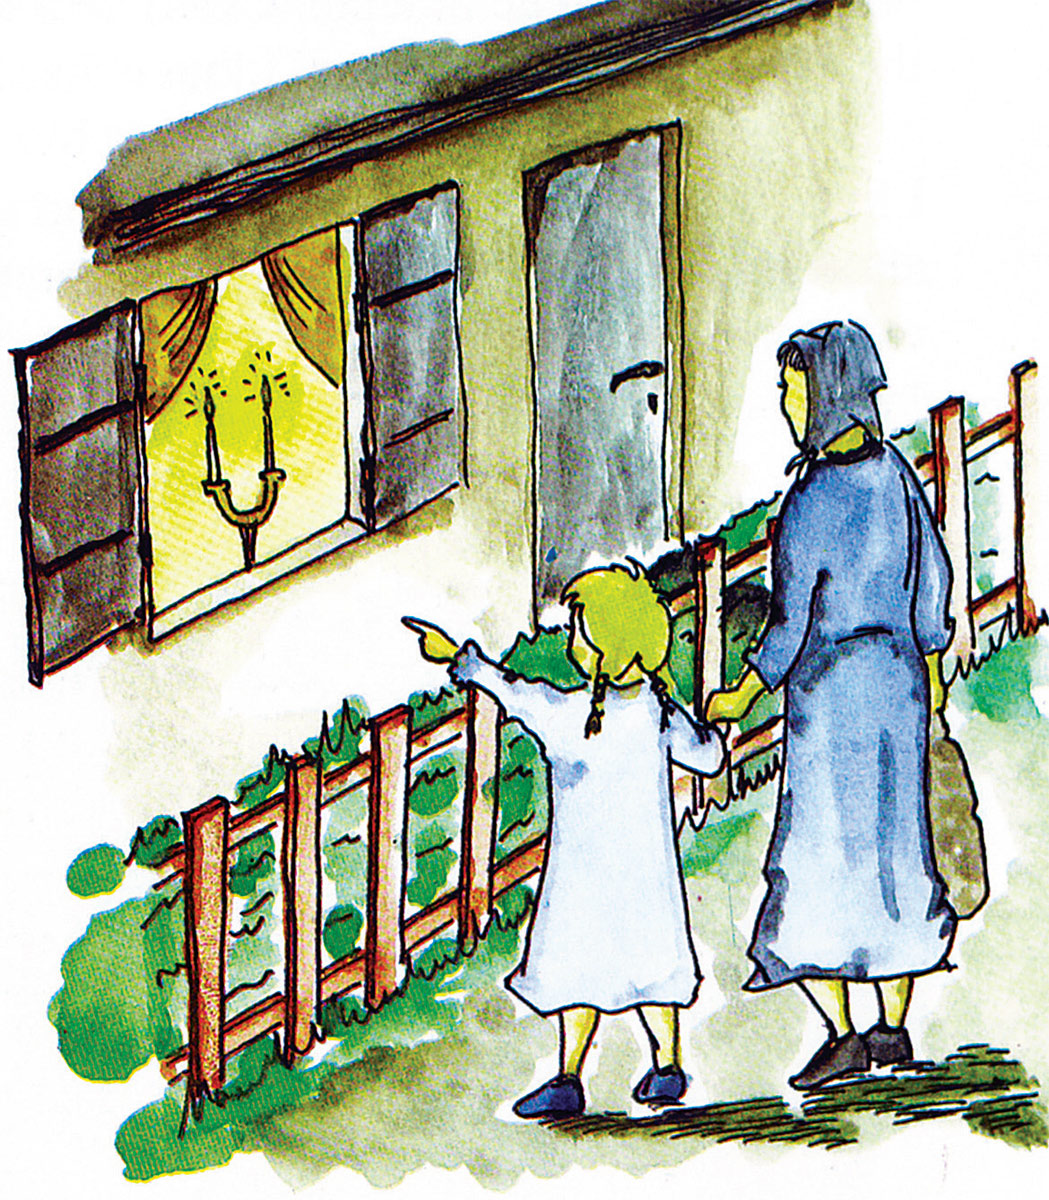 "It's the eve of Shabbat" (an illustration from the book)